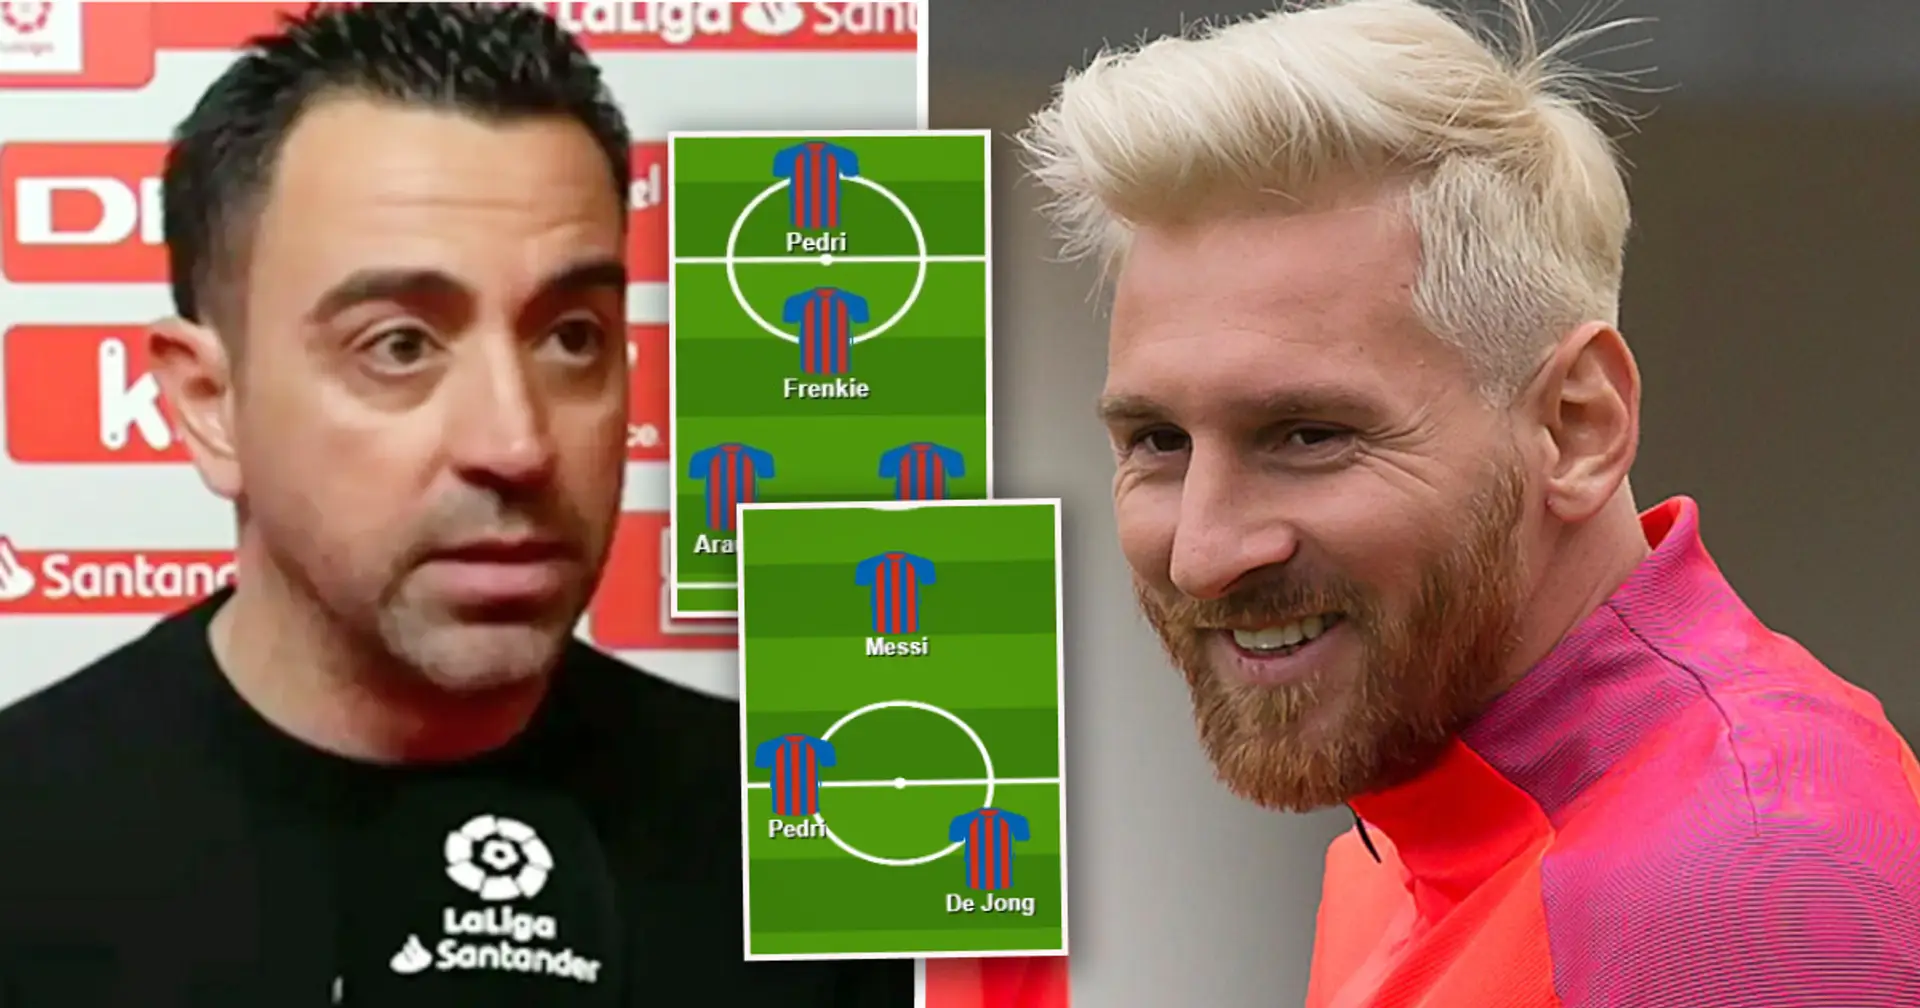 How Barca would likely line up after Messi’s return: 3 options